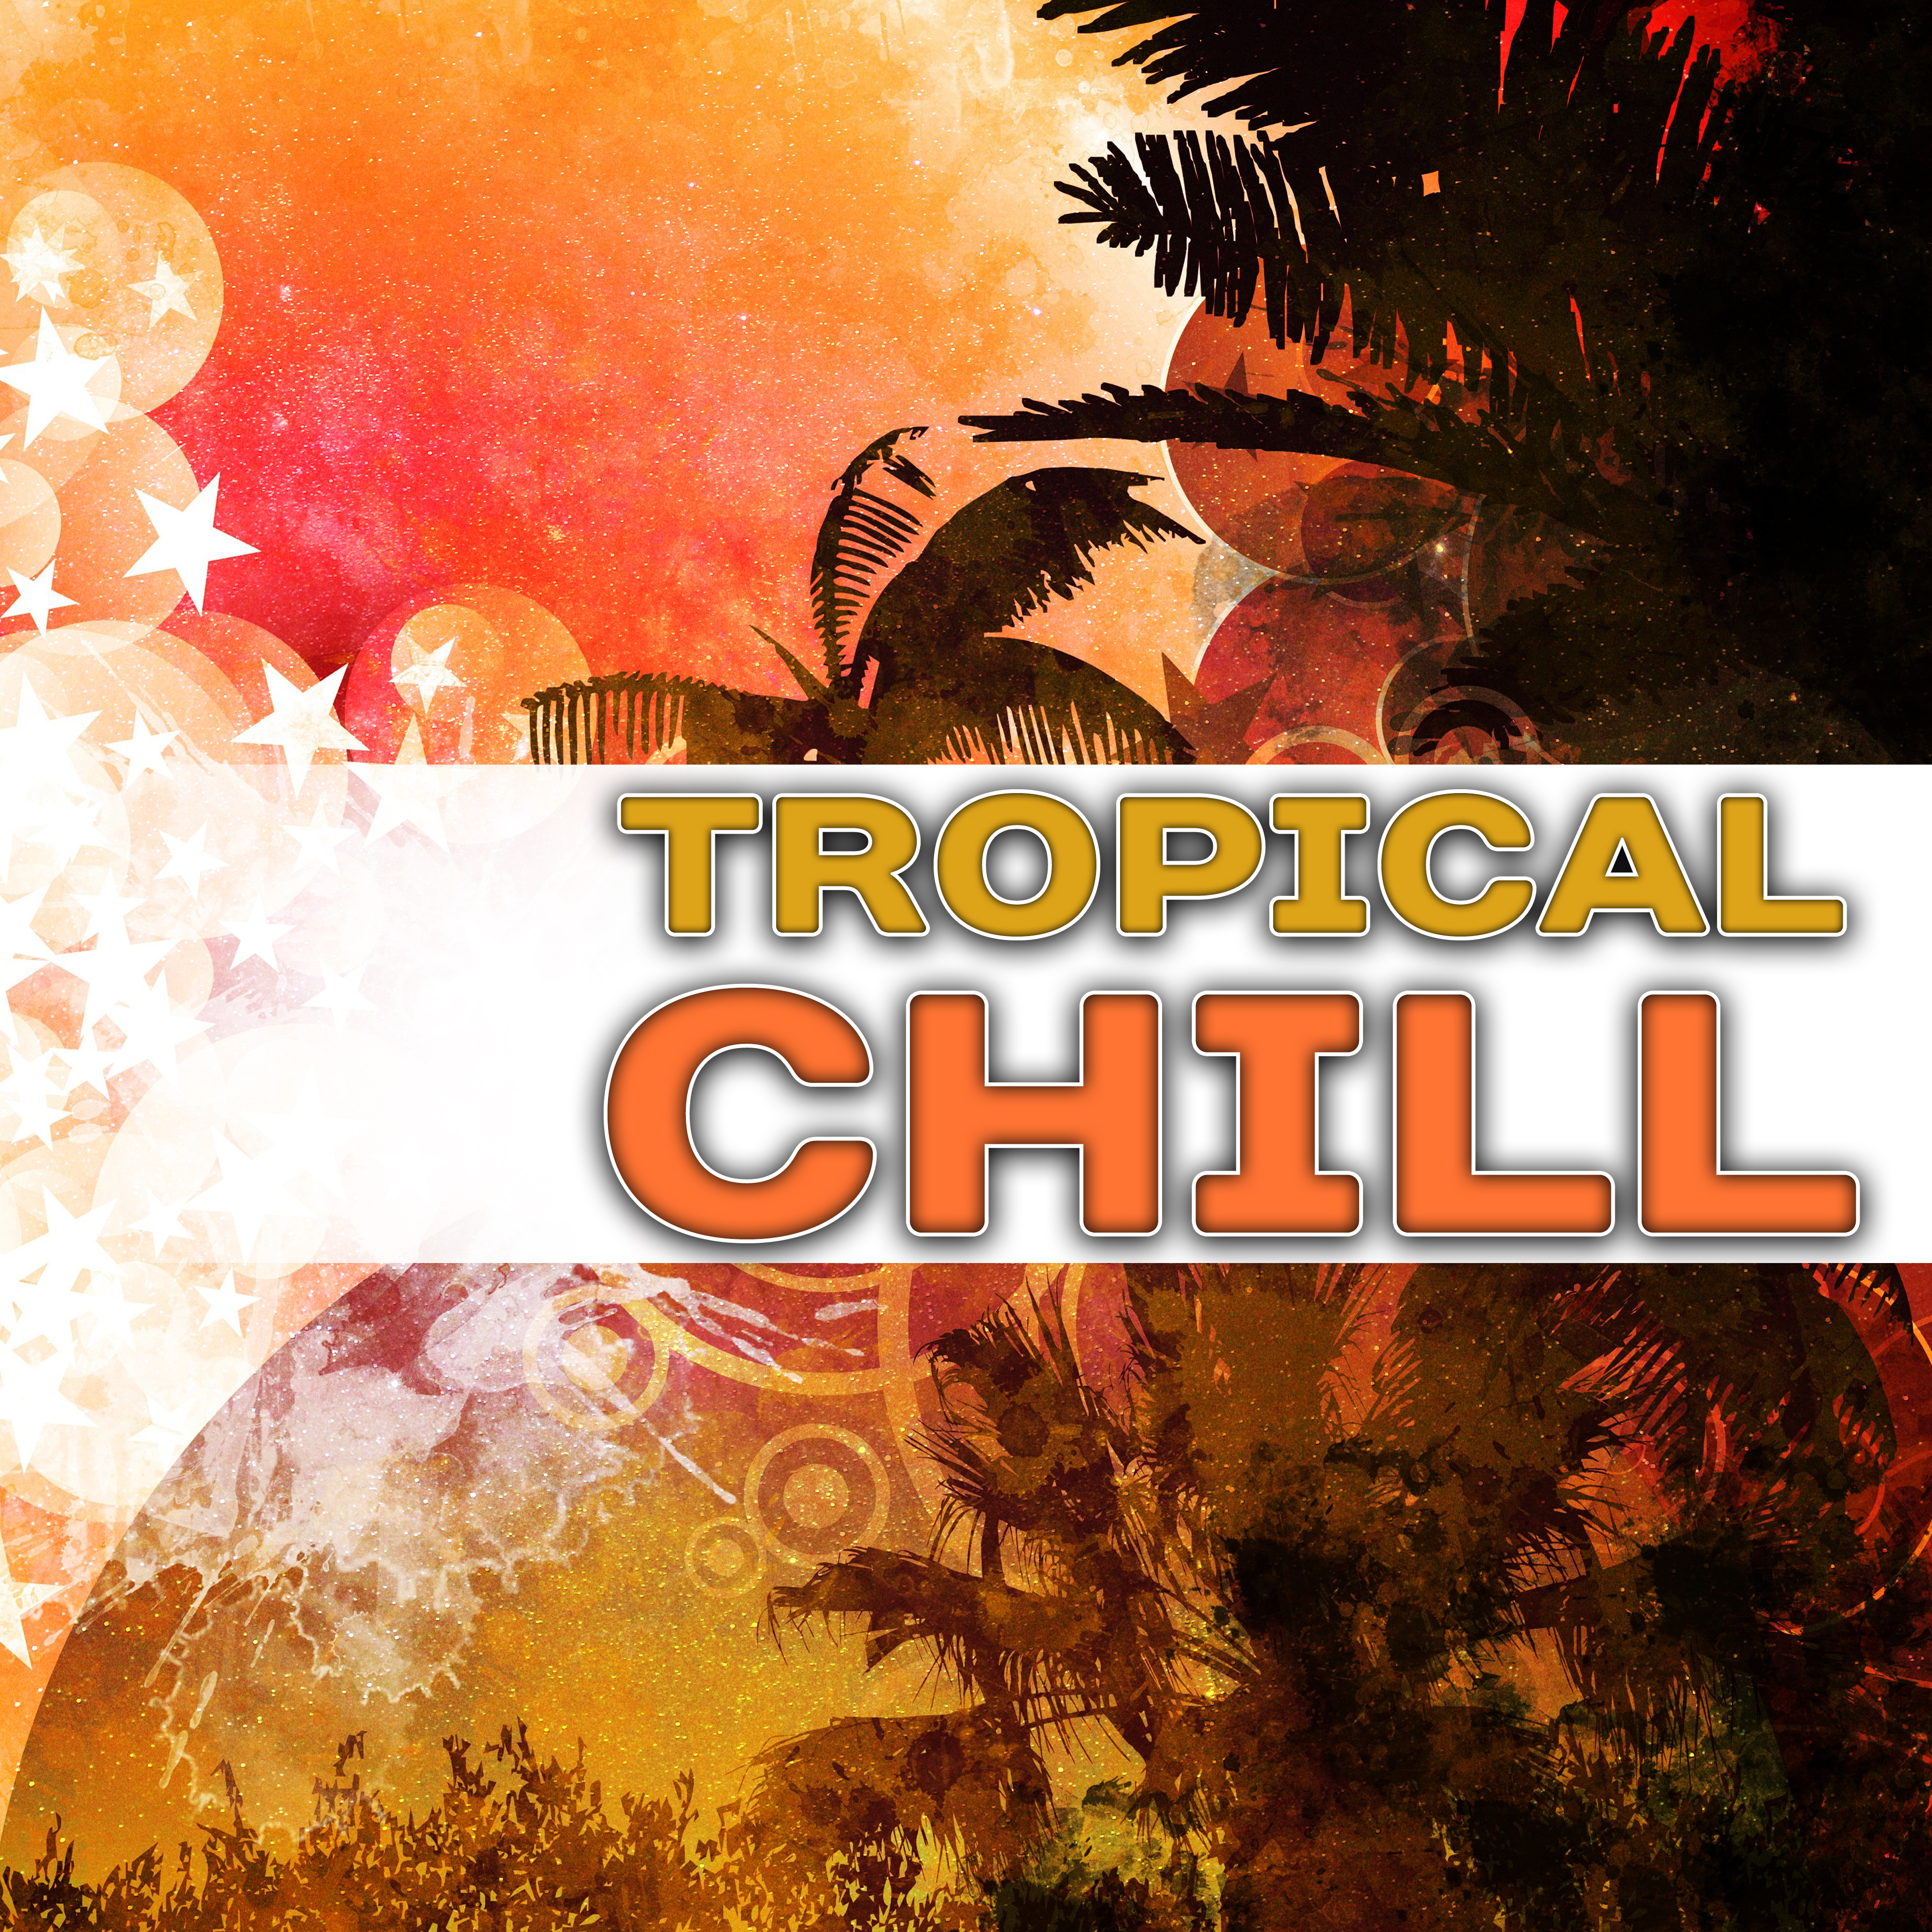 Tropical Chill – Beach Music, Summer Chill Out, Colorful Drinks, Bar Chill Out, Lounge Summer, Pure Relaxation, Ibiza Poolside